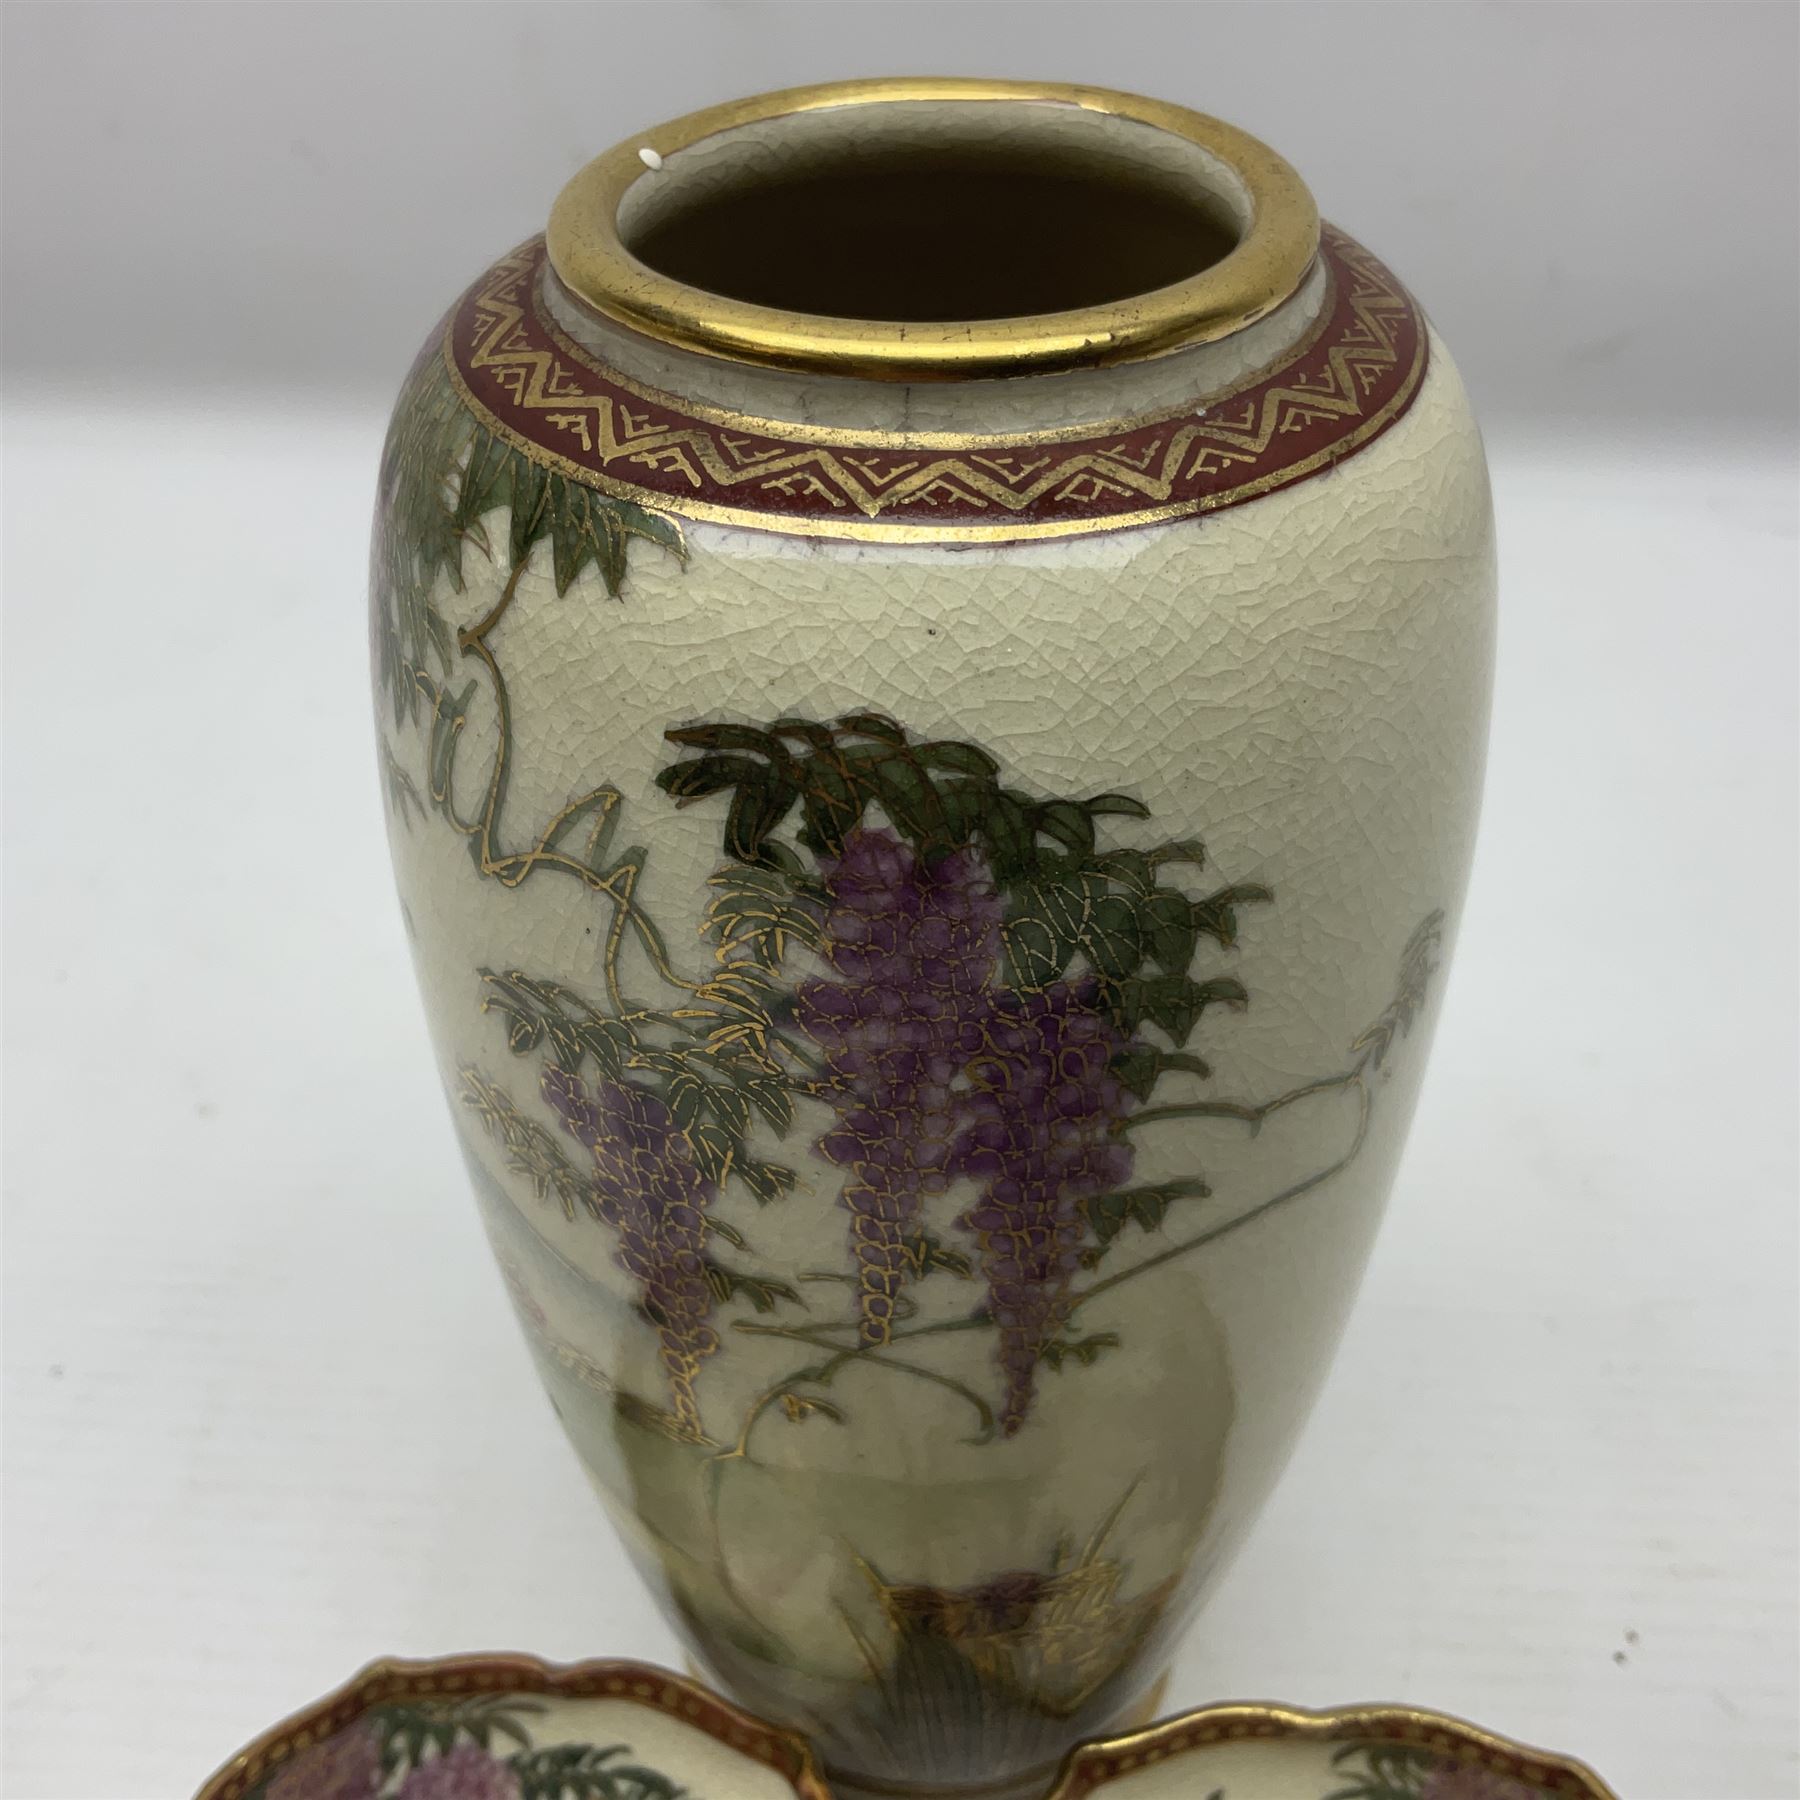 Japanese Satsuma Meiji period vase painted with a mountainous river landscape scene with wisteria an - Image 3 of 9